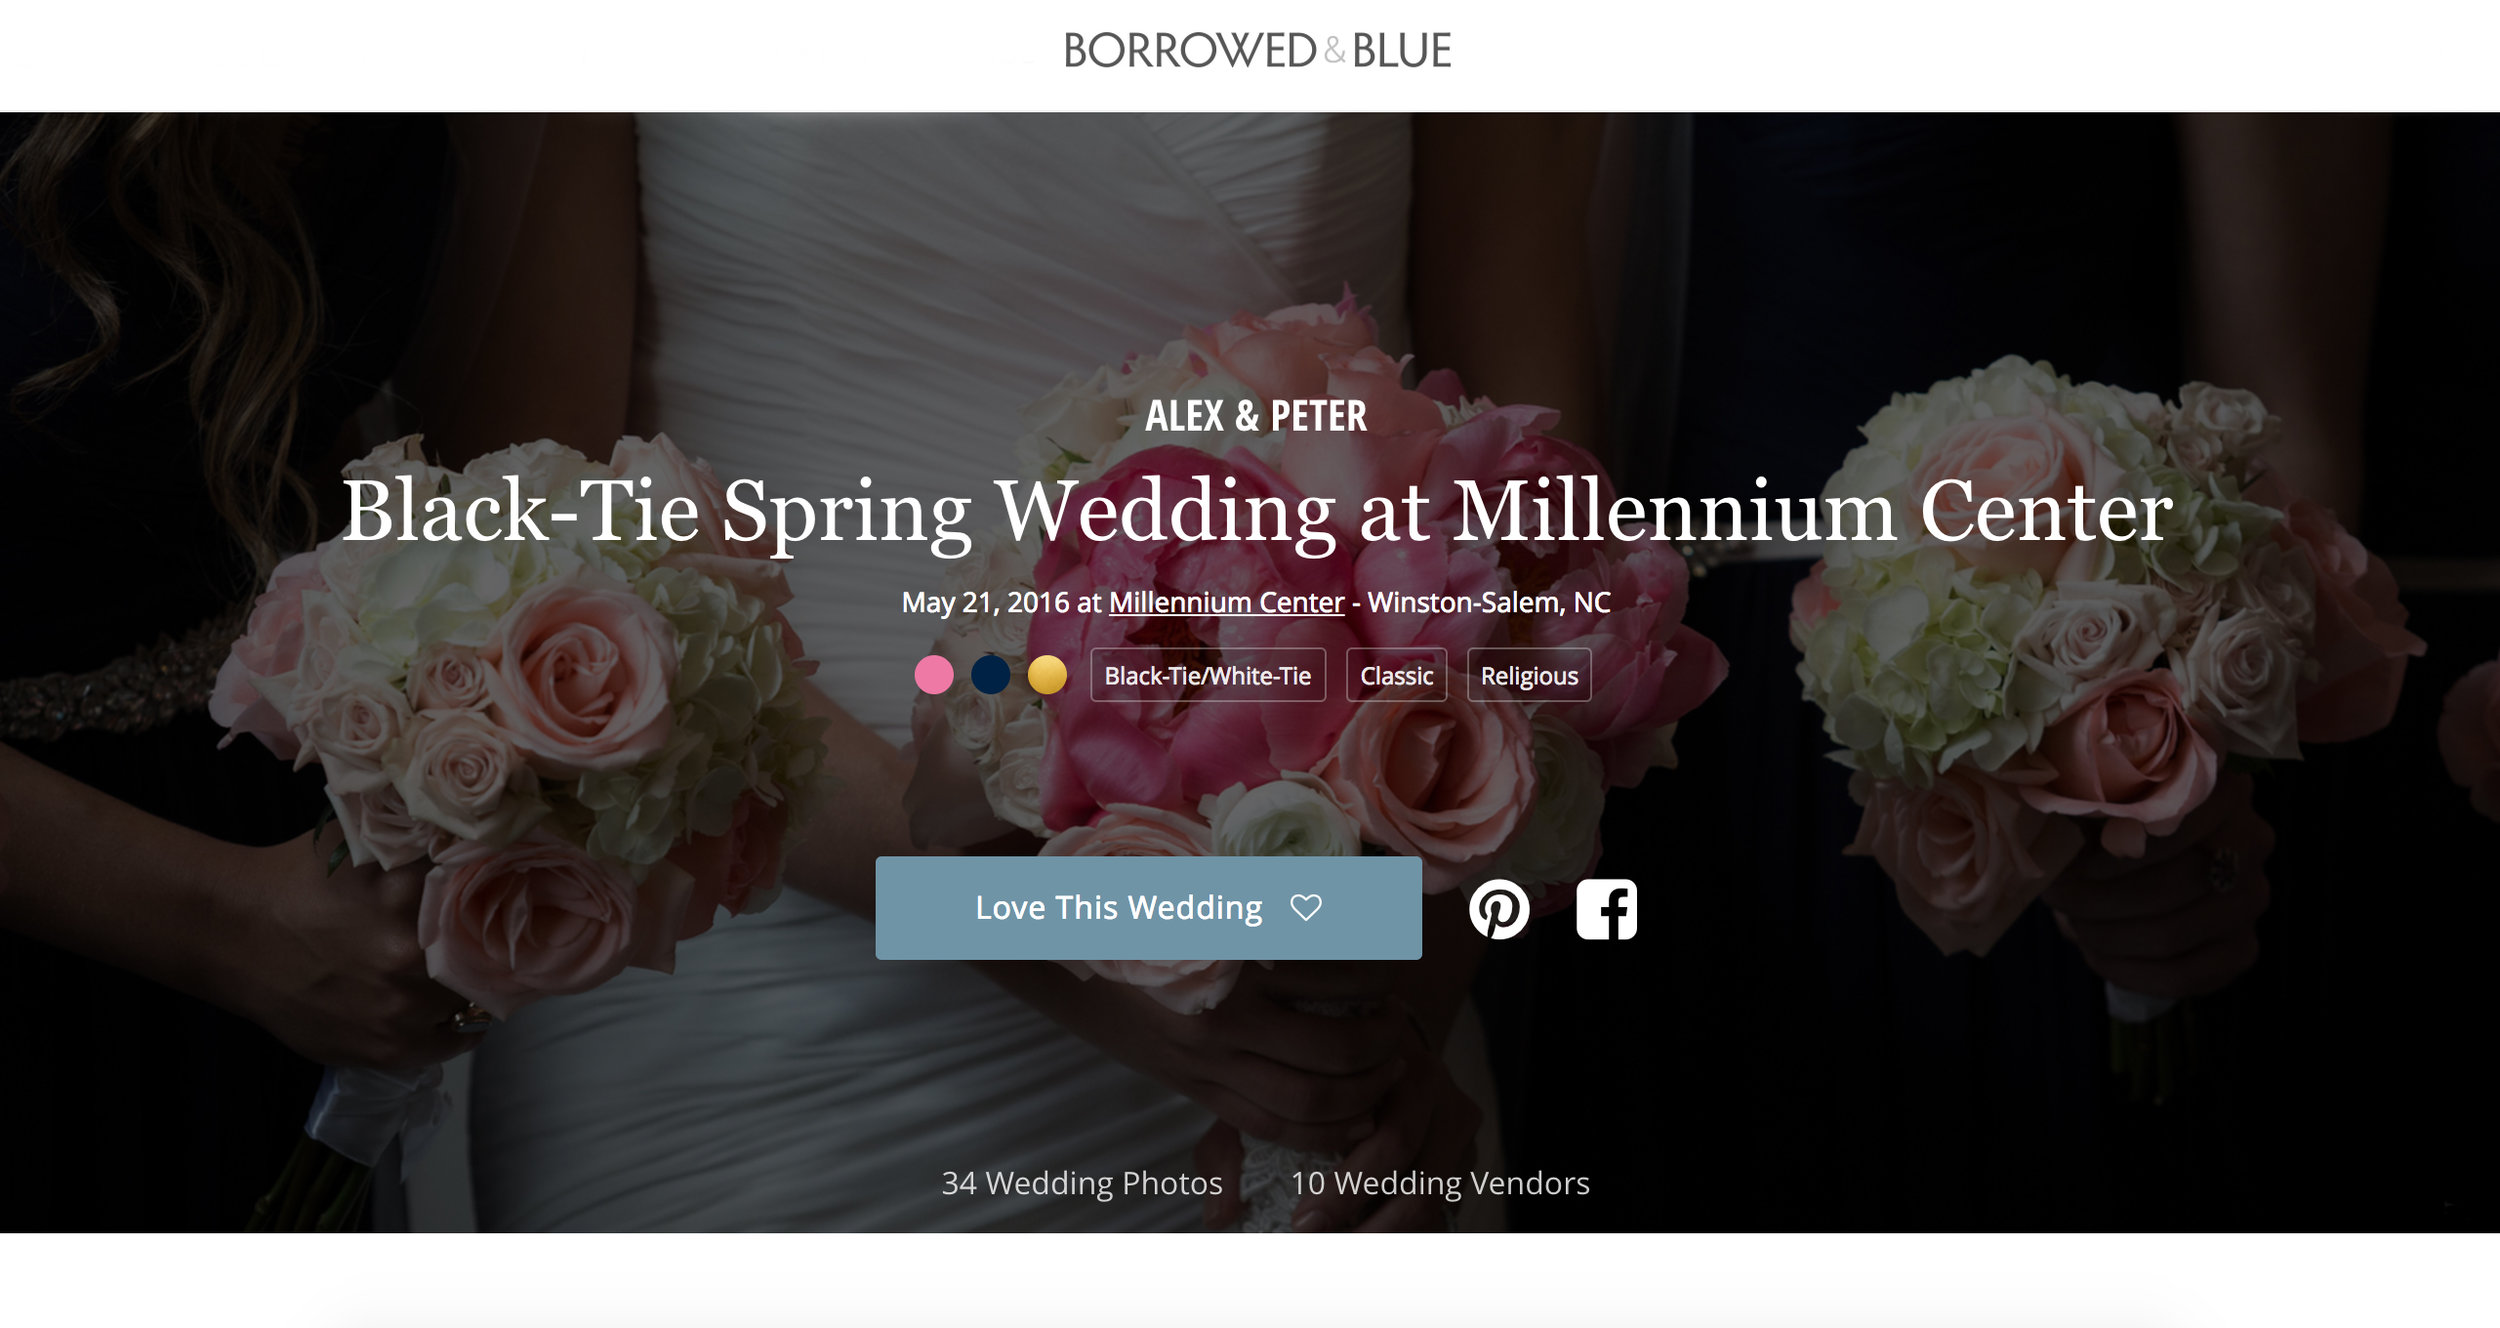 To view their wedding on Borrowed and Blue - Click here